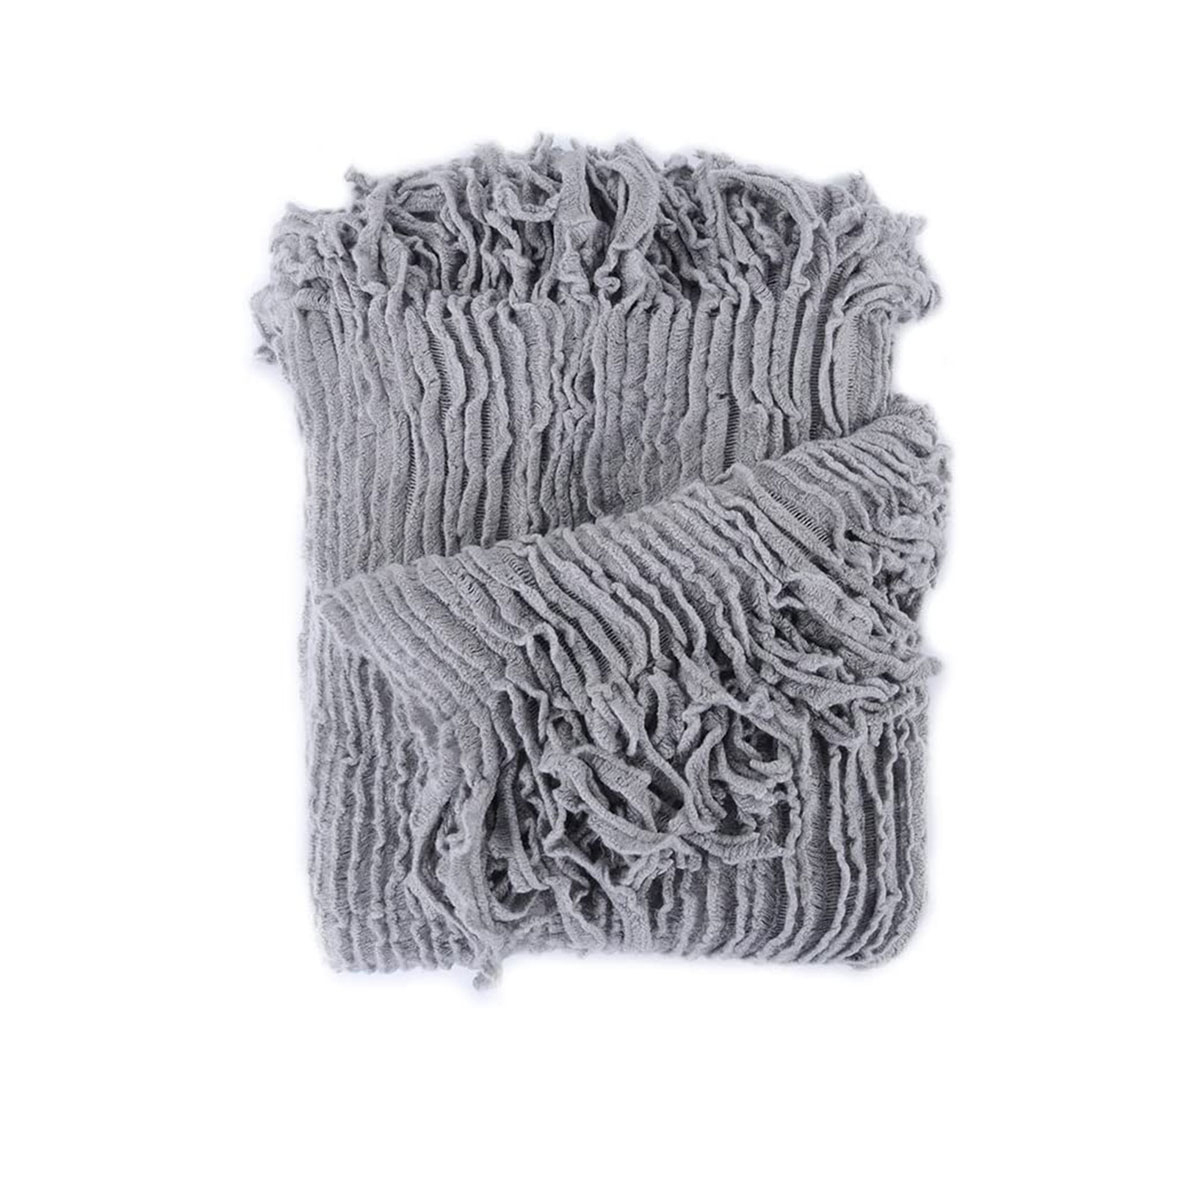 Dylan Knitted Throw Rug Price